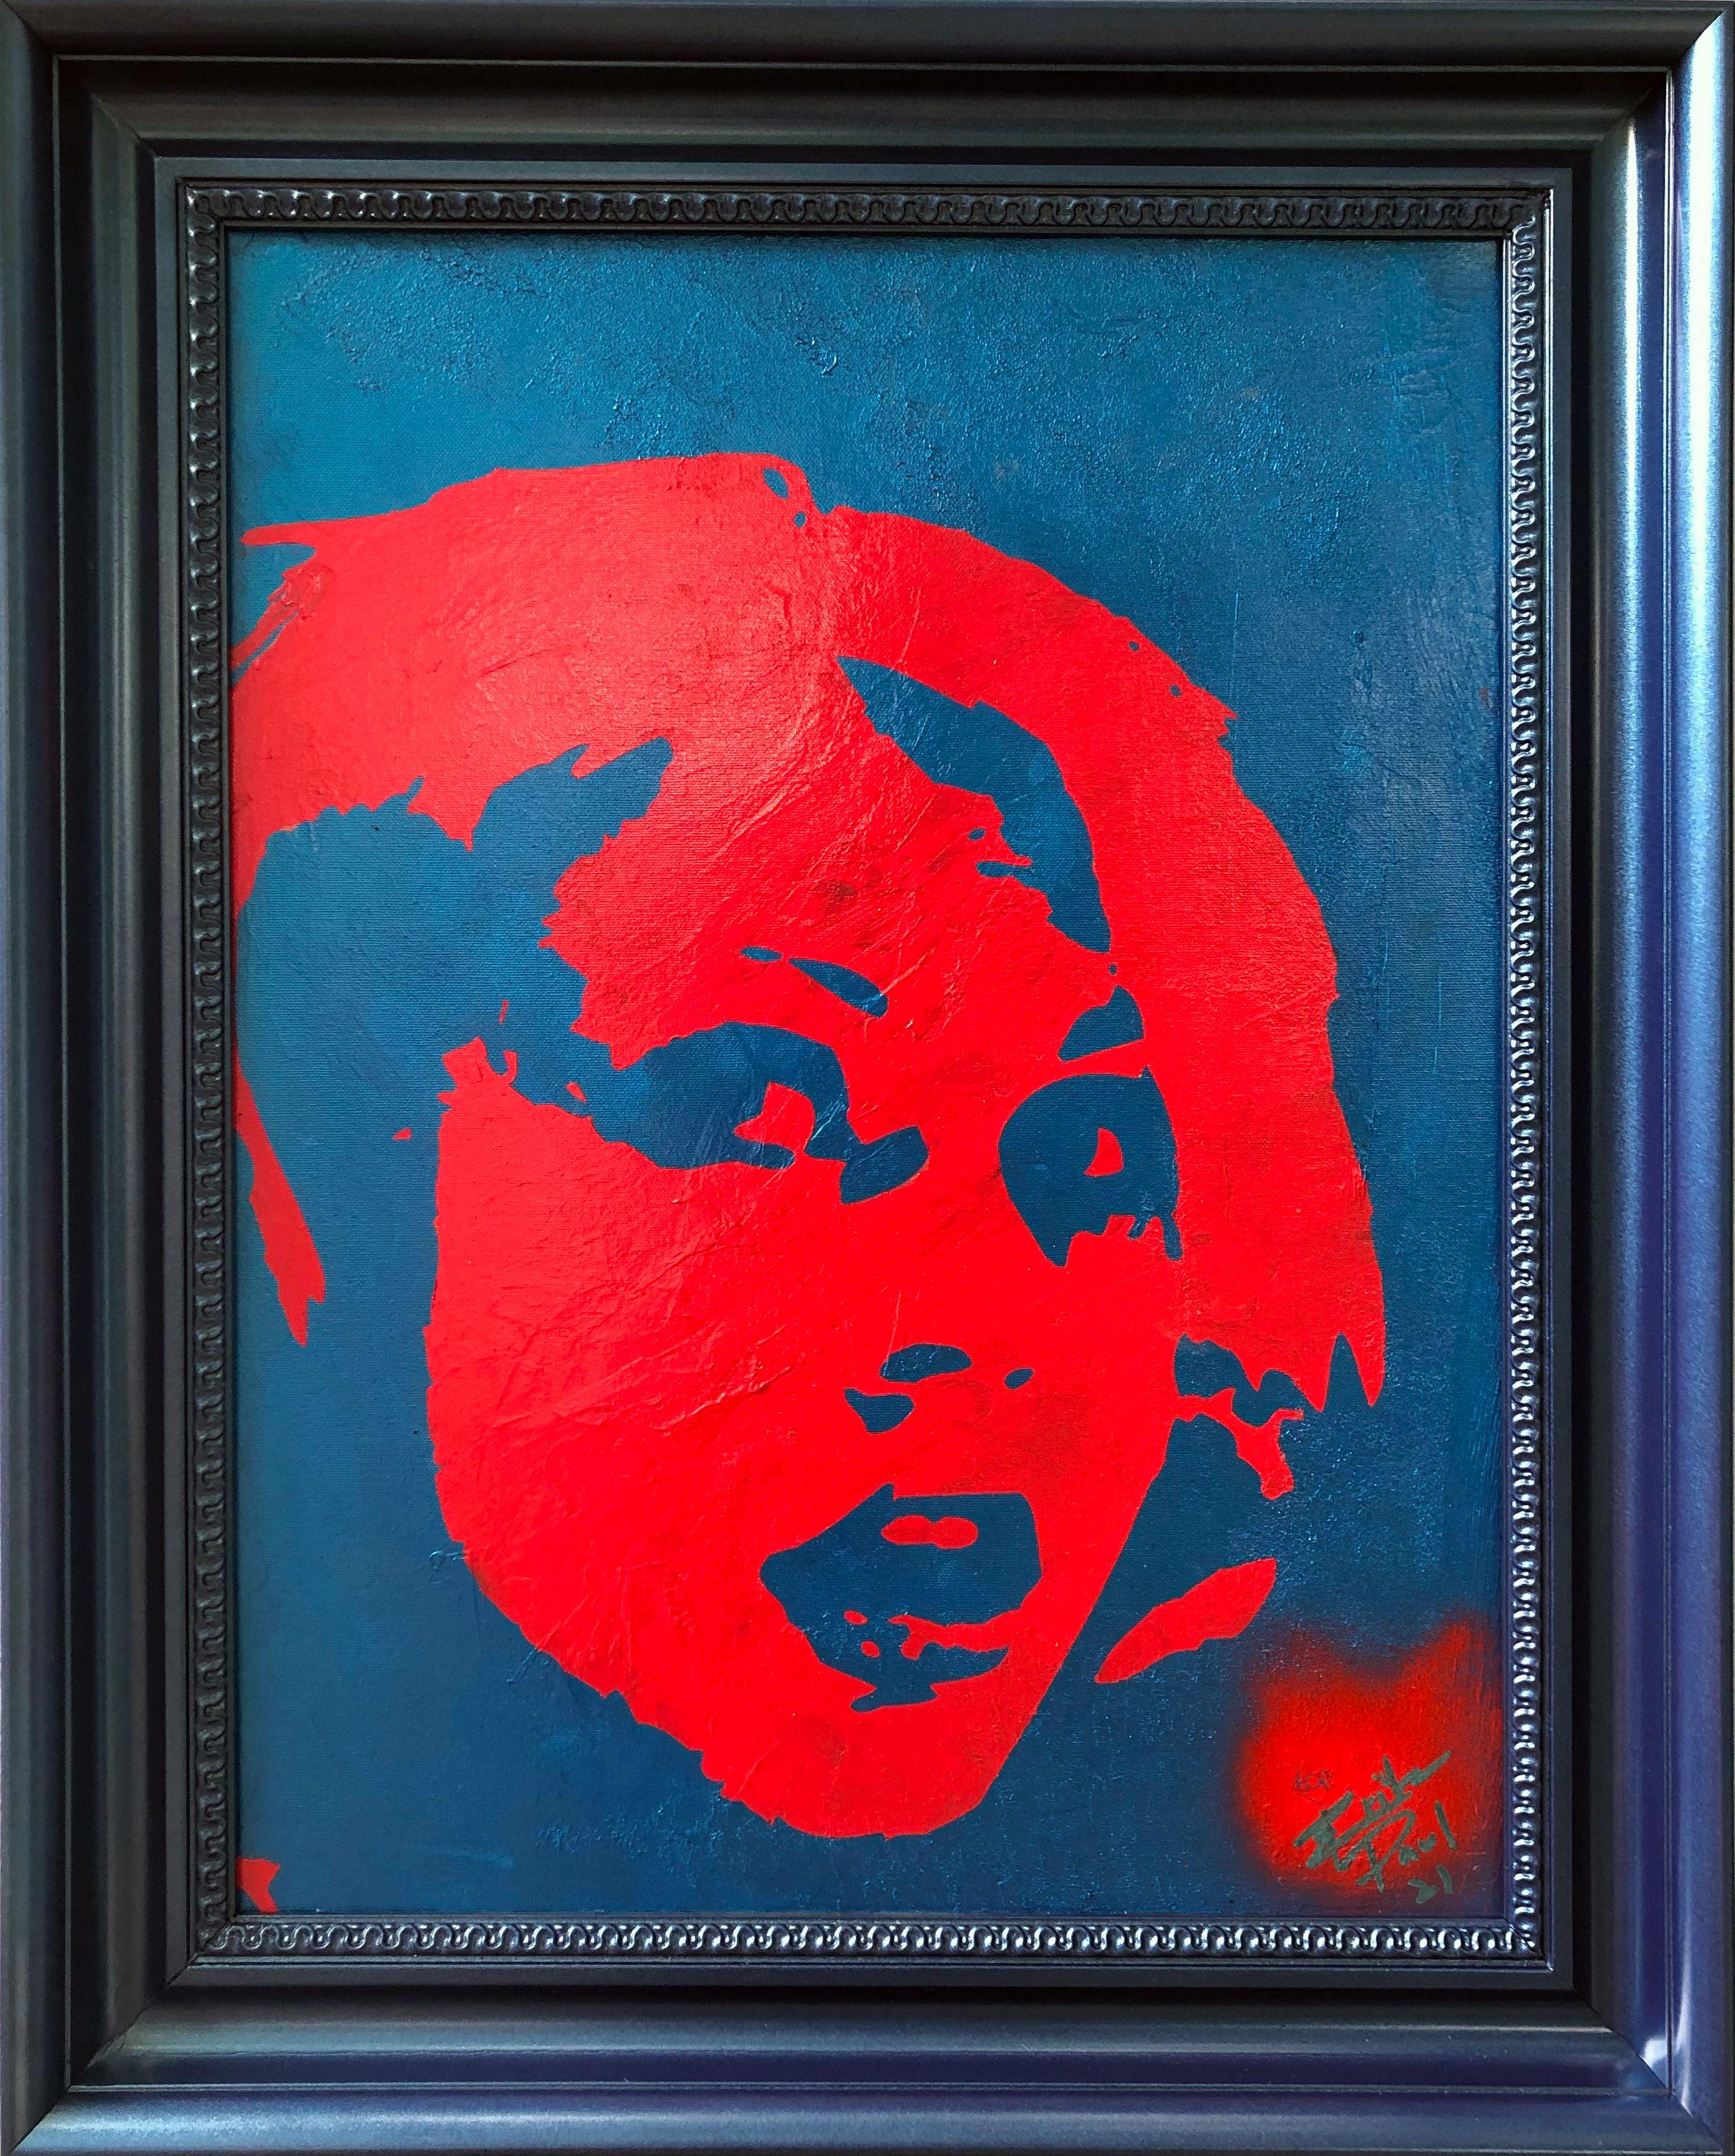 Acrylic on canvas. A painting with a nod to Andy Warhol. Beautiful hot pink with metallic blue paint. She seems to be about to answer a question or acknowledge your desire. What is your desire? She will always listen to you. Taking stencil art to a